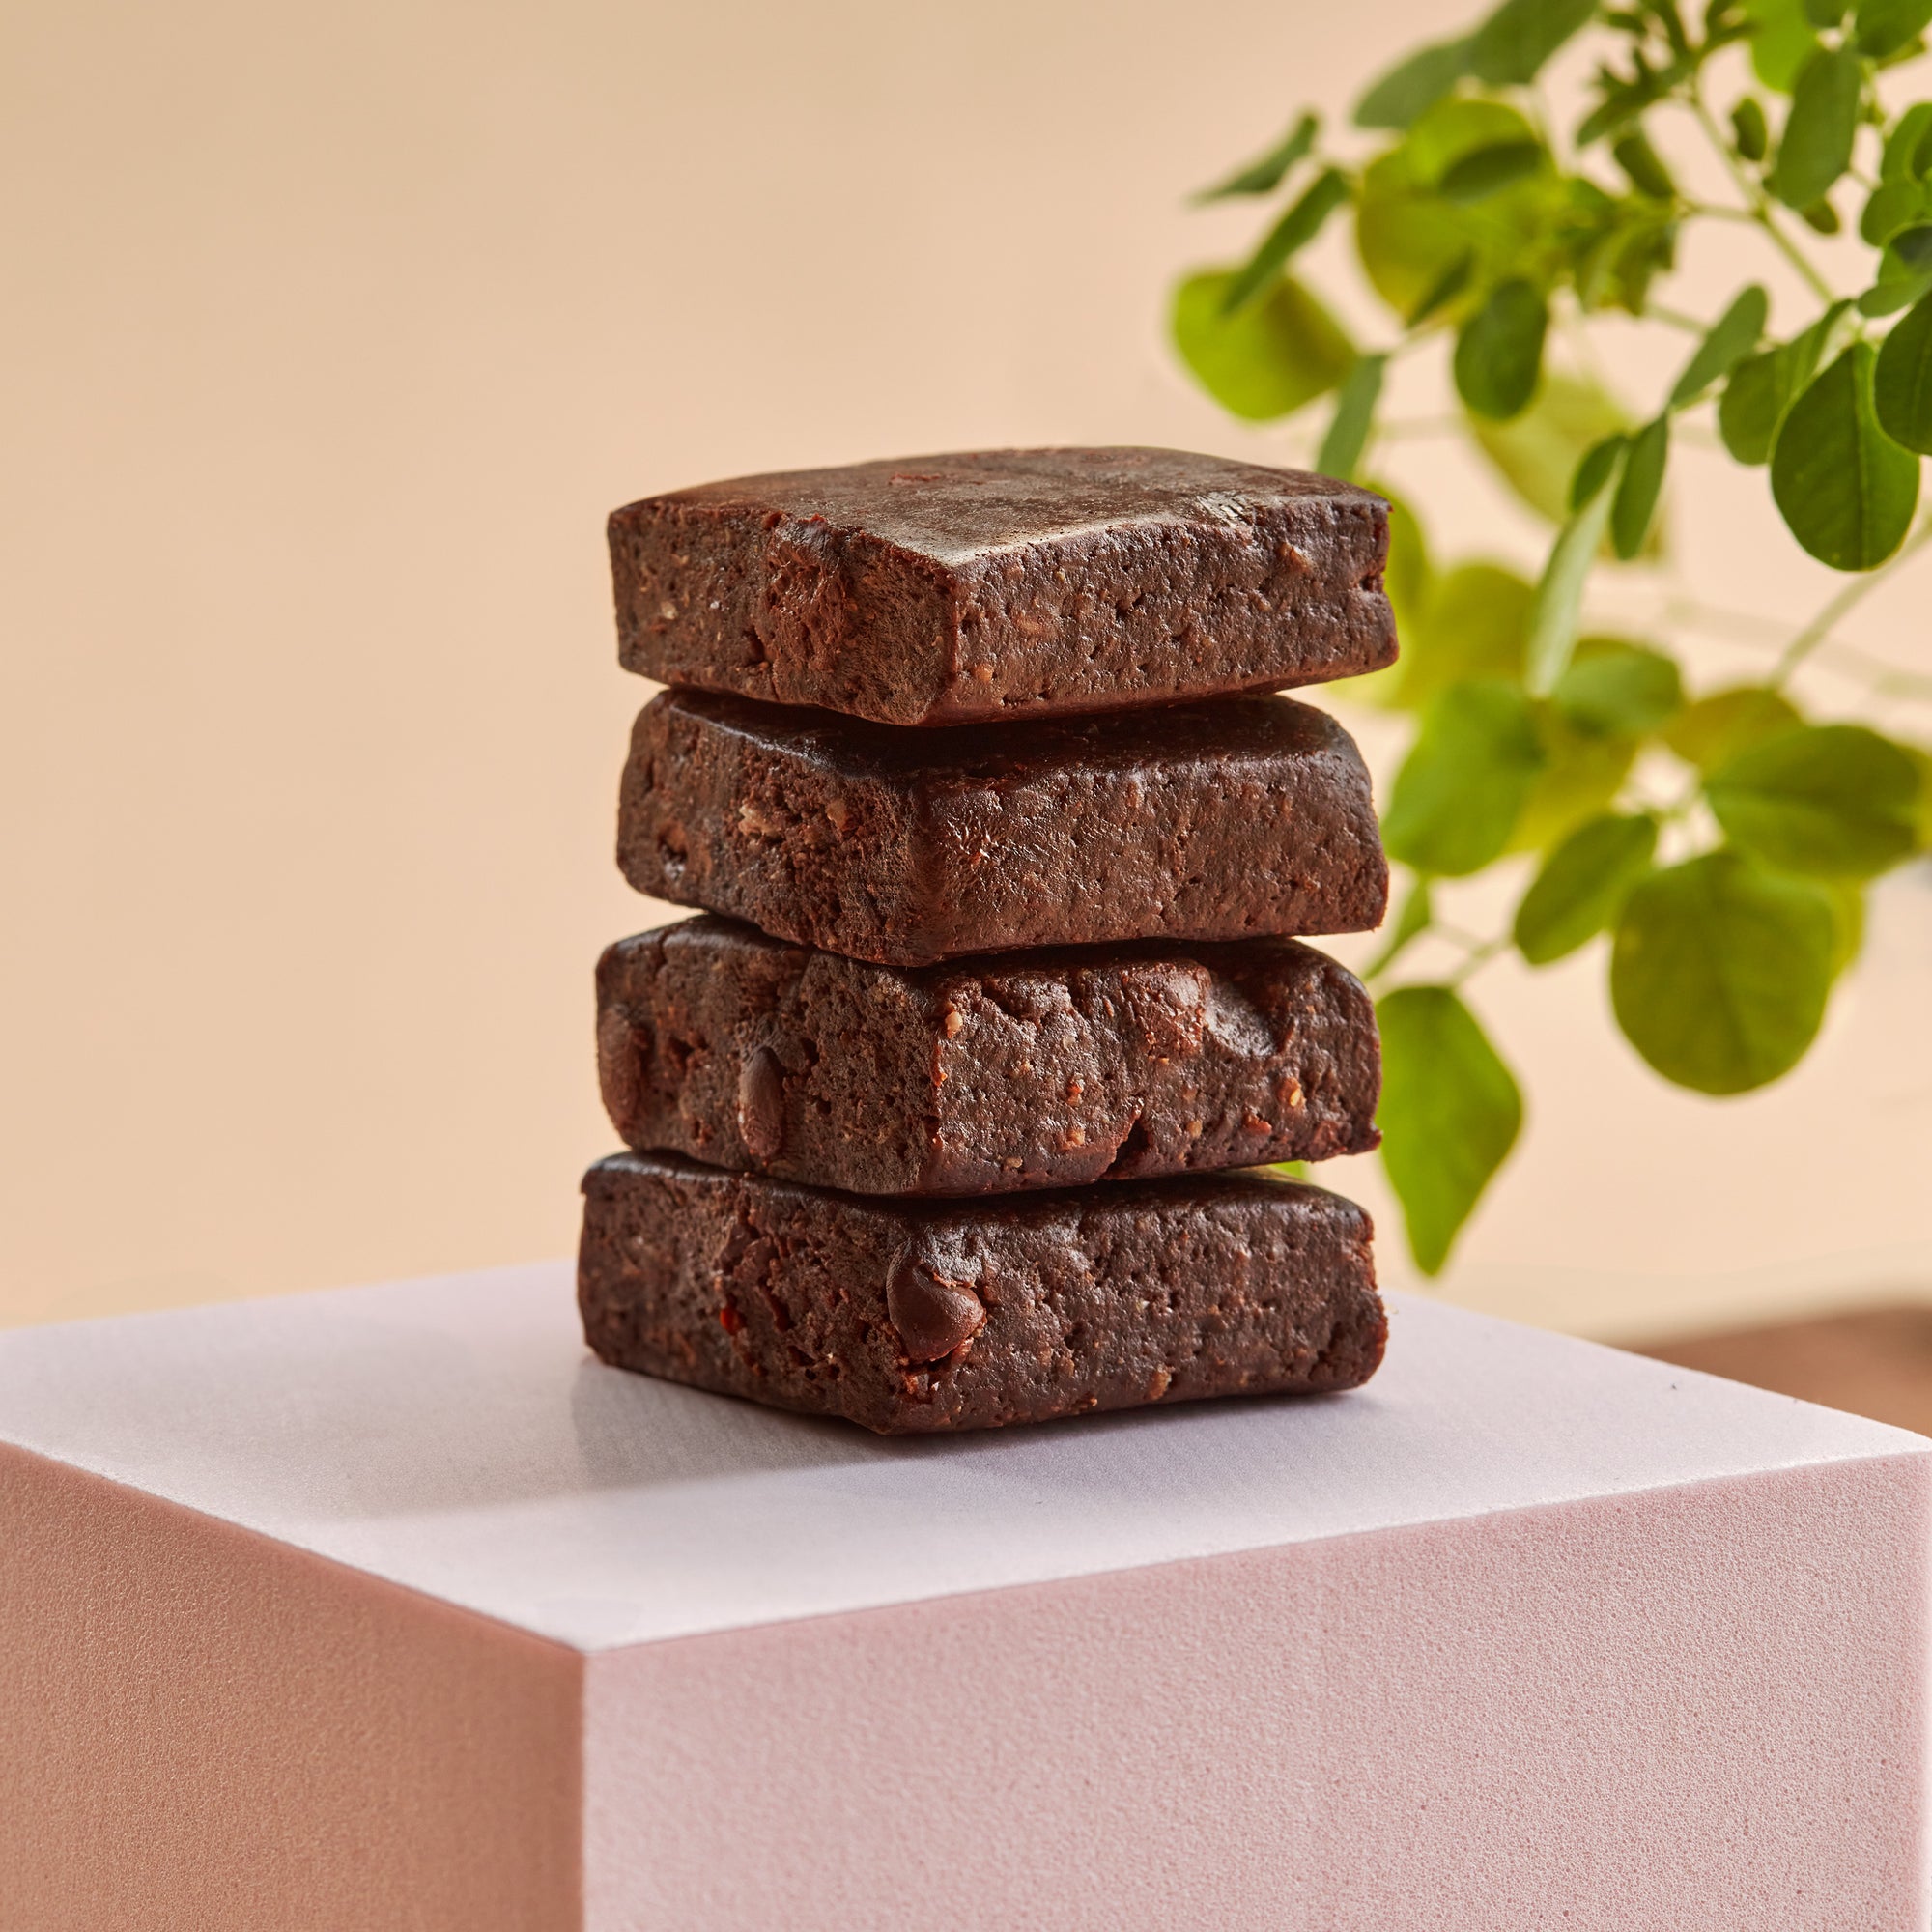 Sweetie Pie Organics Lactation Bar - Chocolate and Sea Salt on a cube with moringa plant in the background